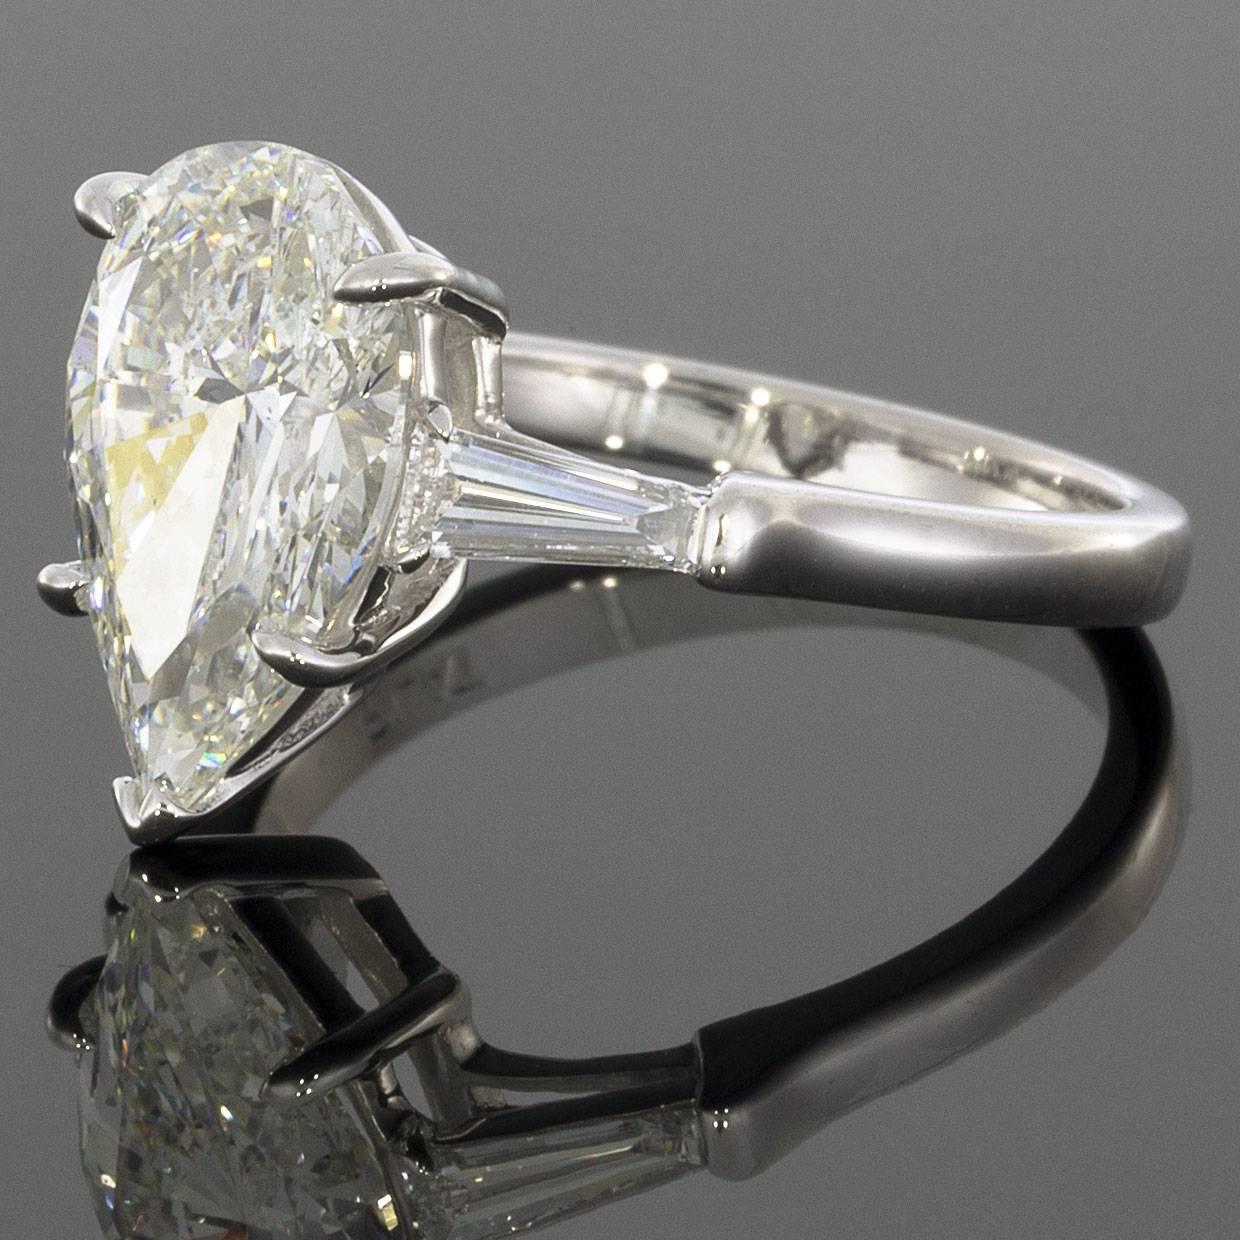 Details:
Platinum setting
3.02CT G/SI1 Pear center diamond 
0.34CTW Baguette accent diamonds
Finger size 6.5
Reg. $50,000
Comes in a beautiful presentation box
An adult signature will be required for delivery unless other arrangements are made prior